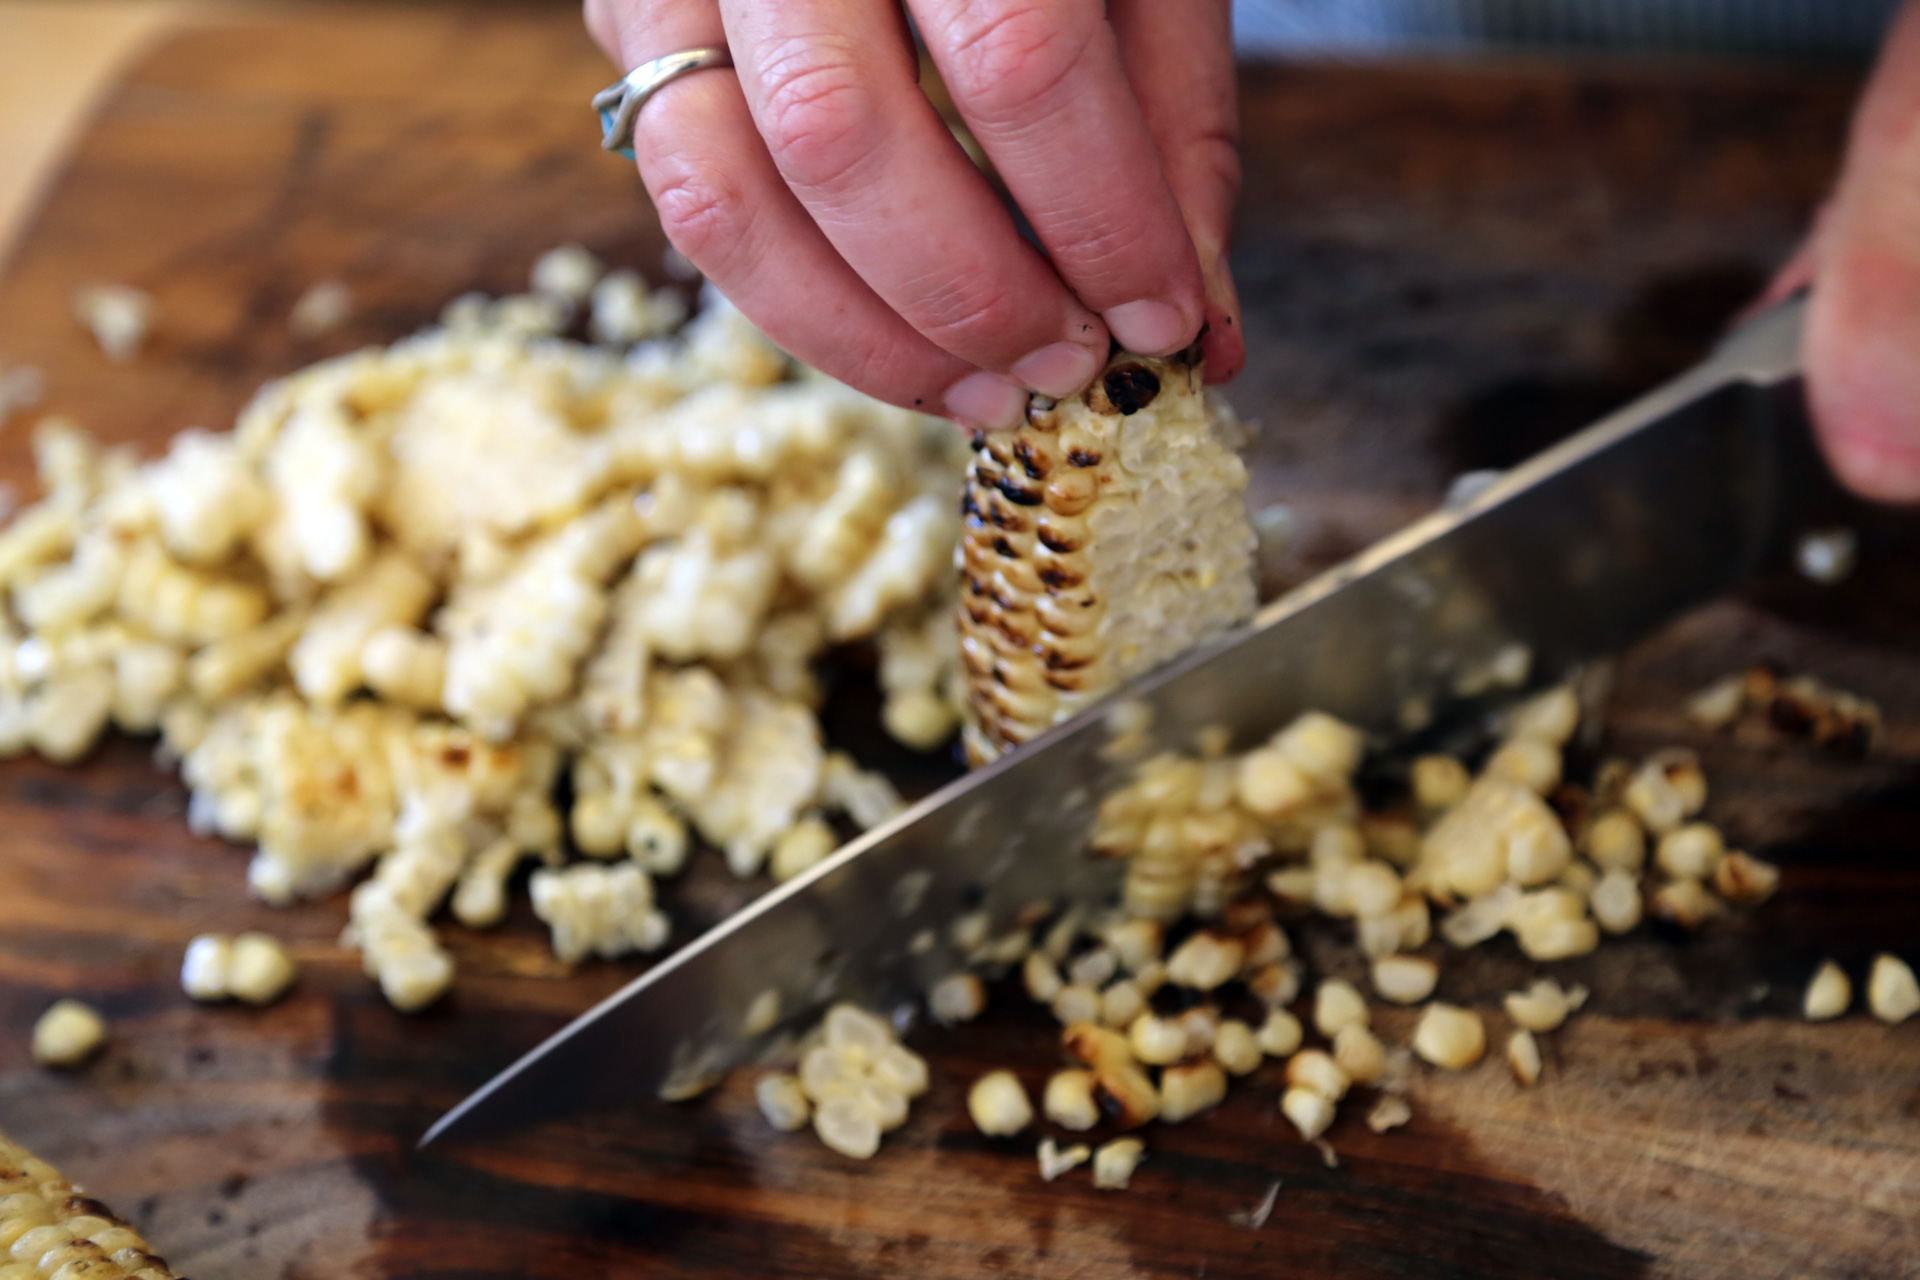 When the corn is cool enough to handle, cut the kernels from the cob using a large, sharp knife.